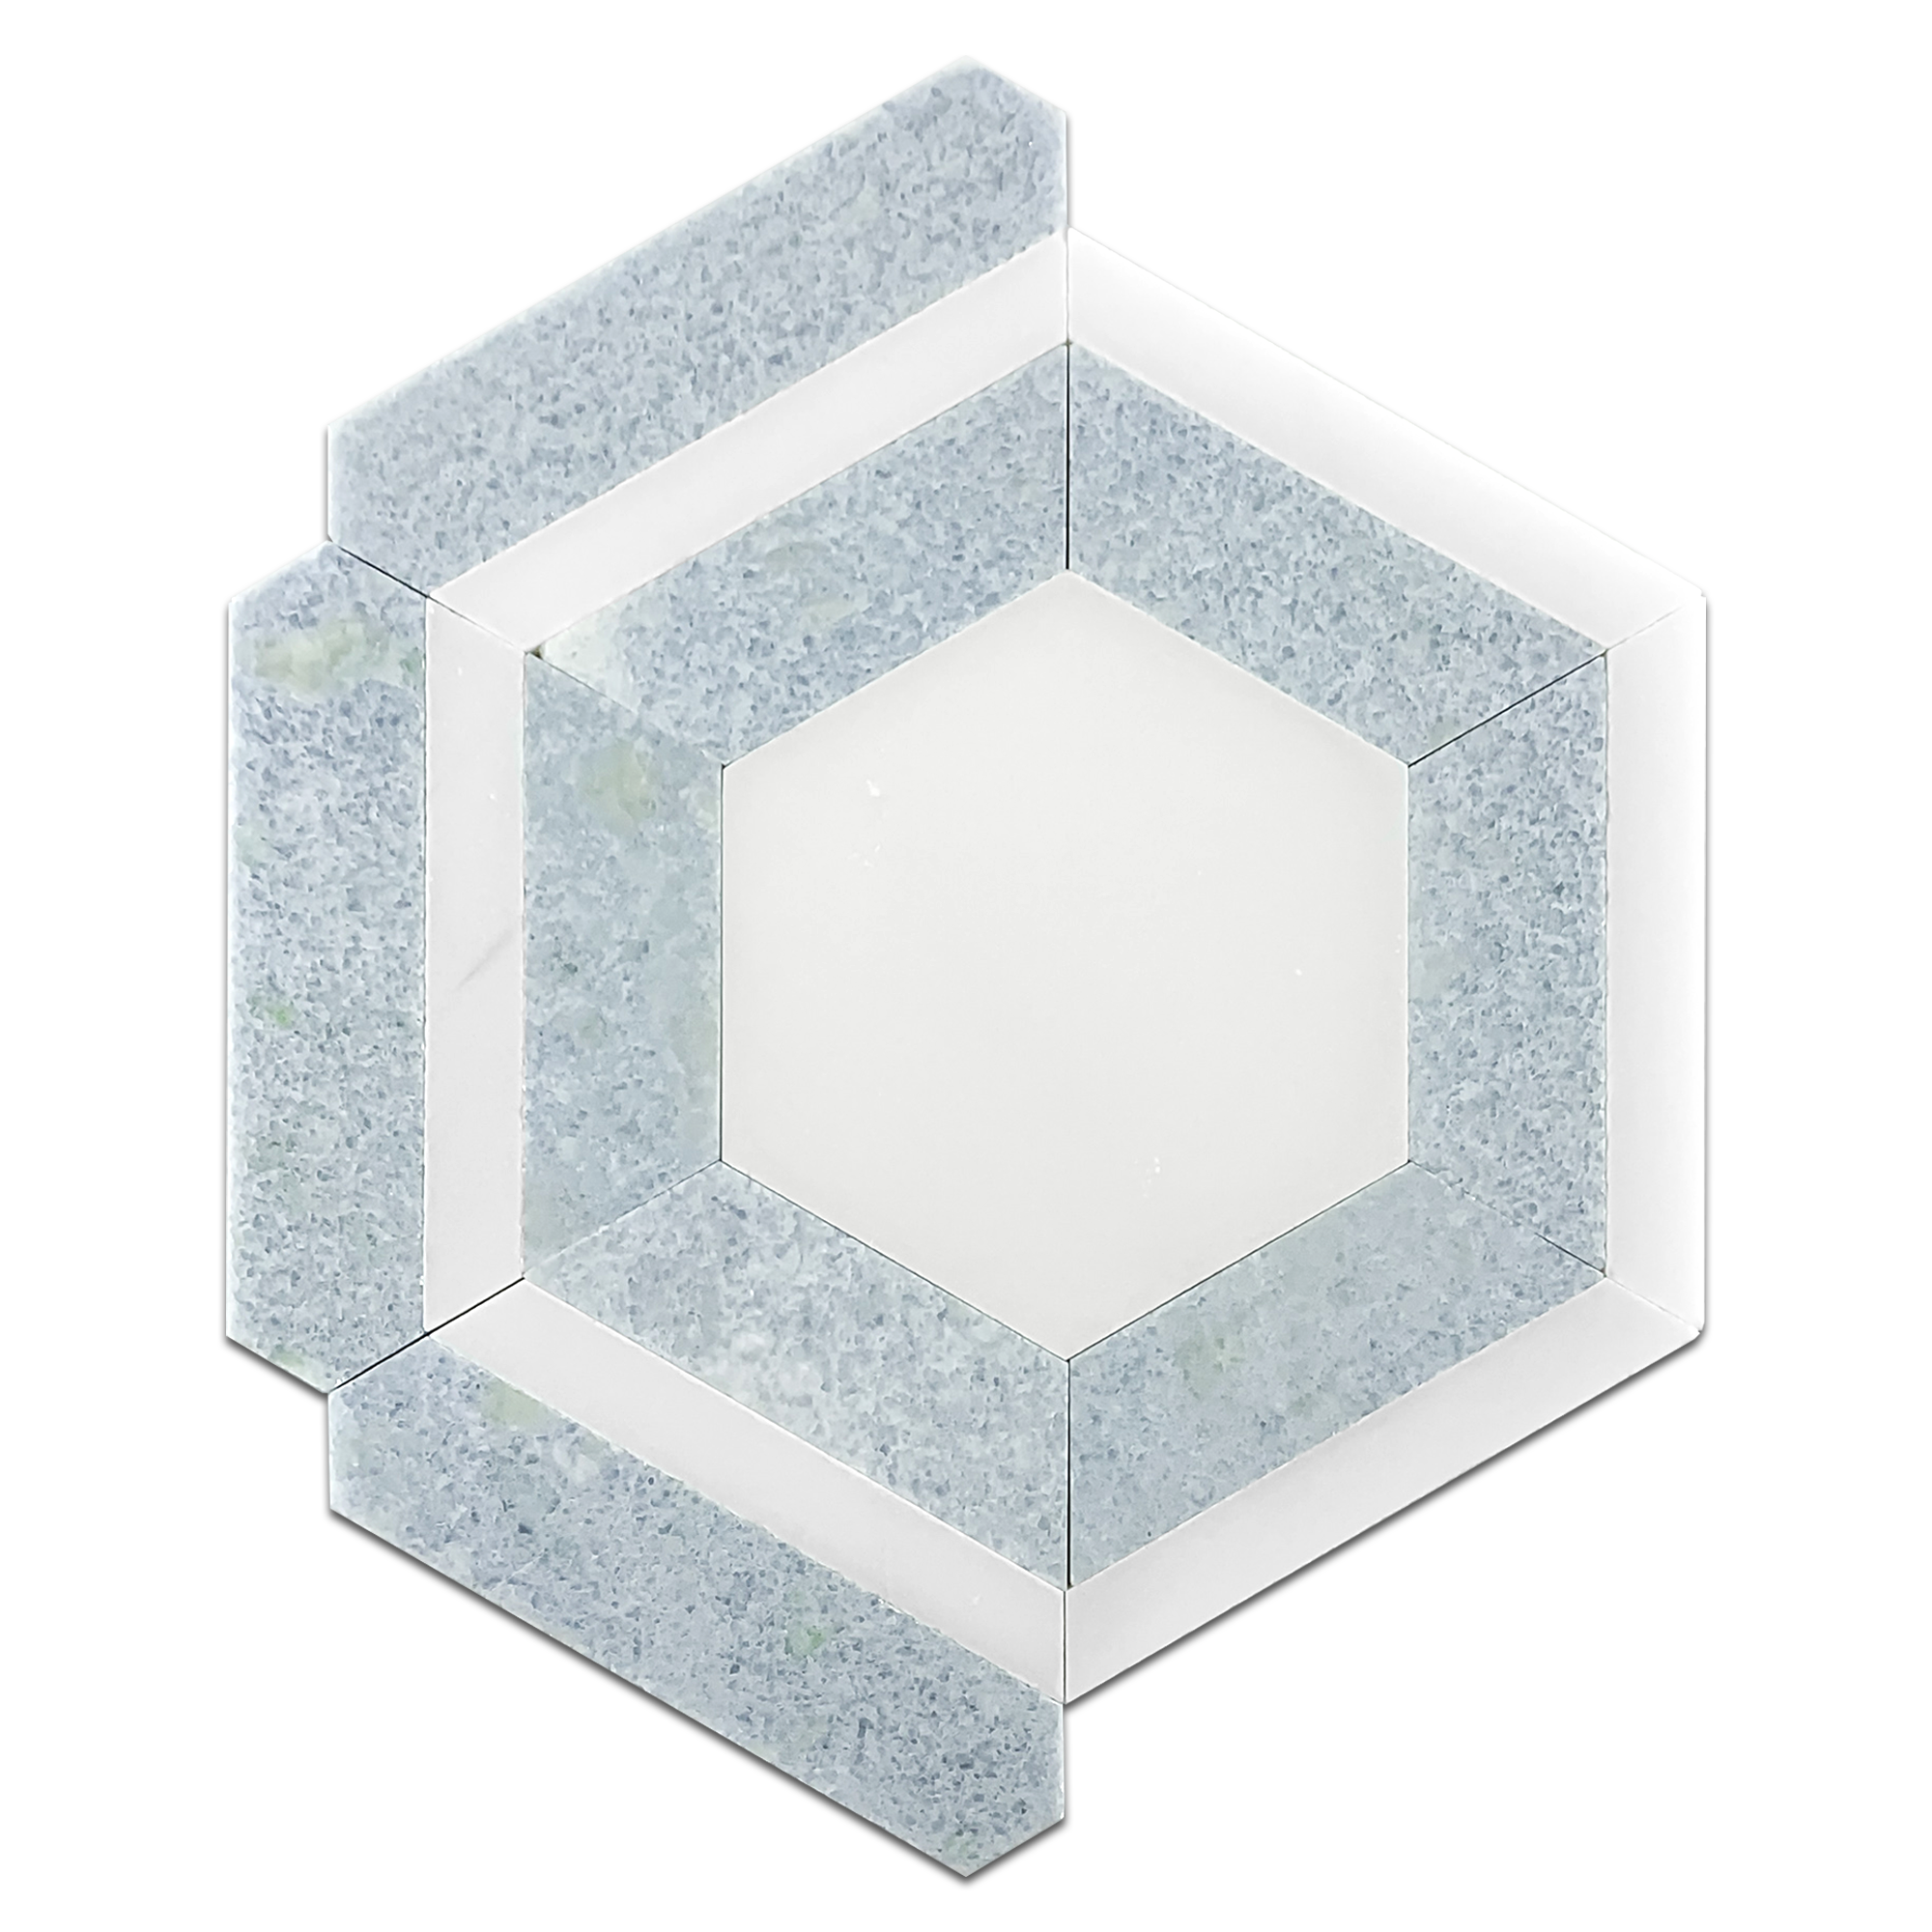 Alt text: "Elon Absolute White and Blue Celeste Marble Outlined Hexagon Field Mosaic, 11.8125x12.75x0.375, Honed Finish, by Surface Group International."